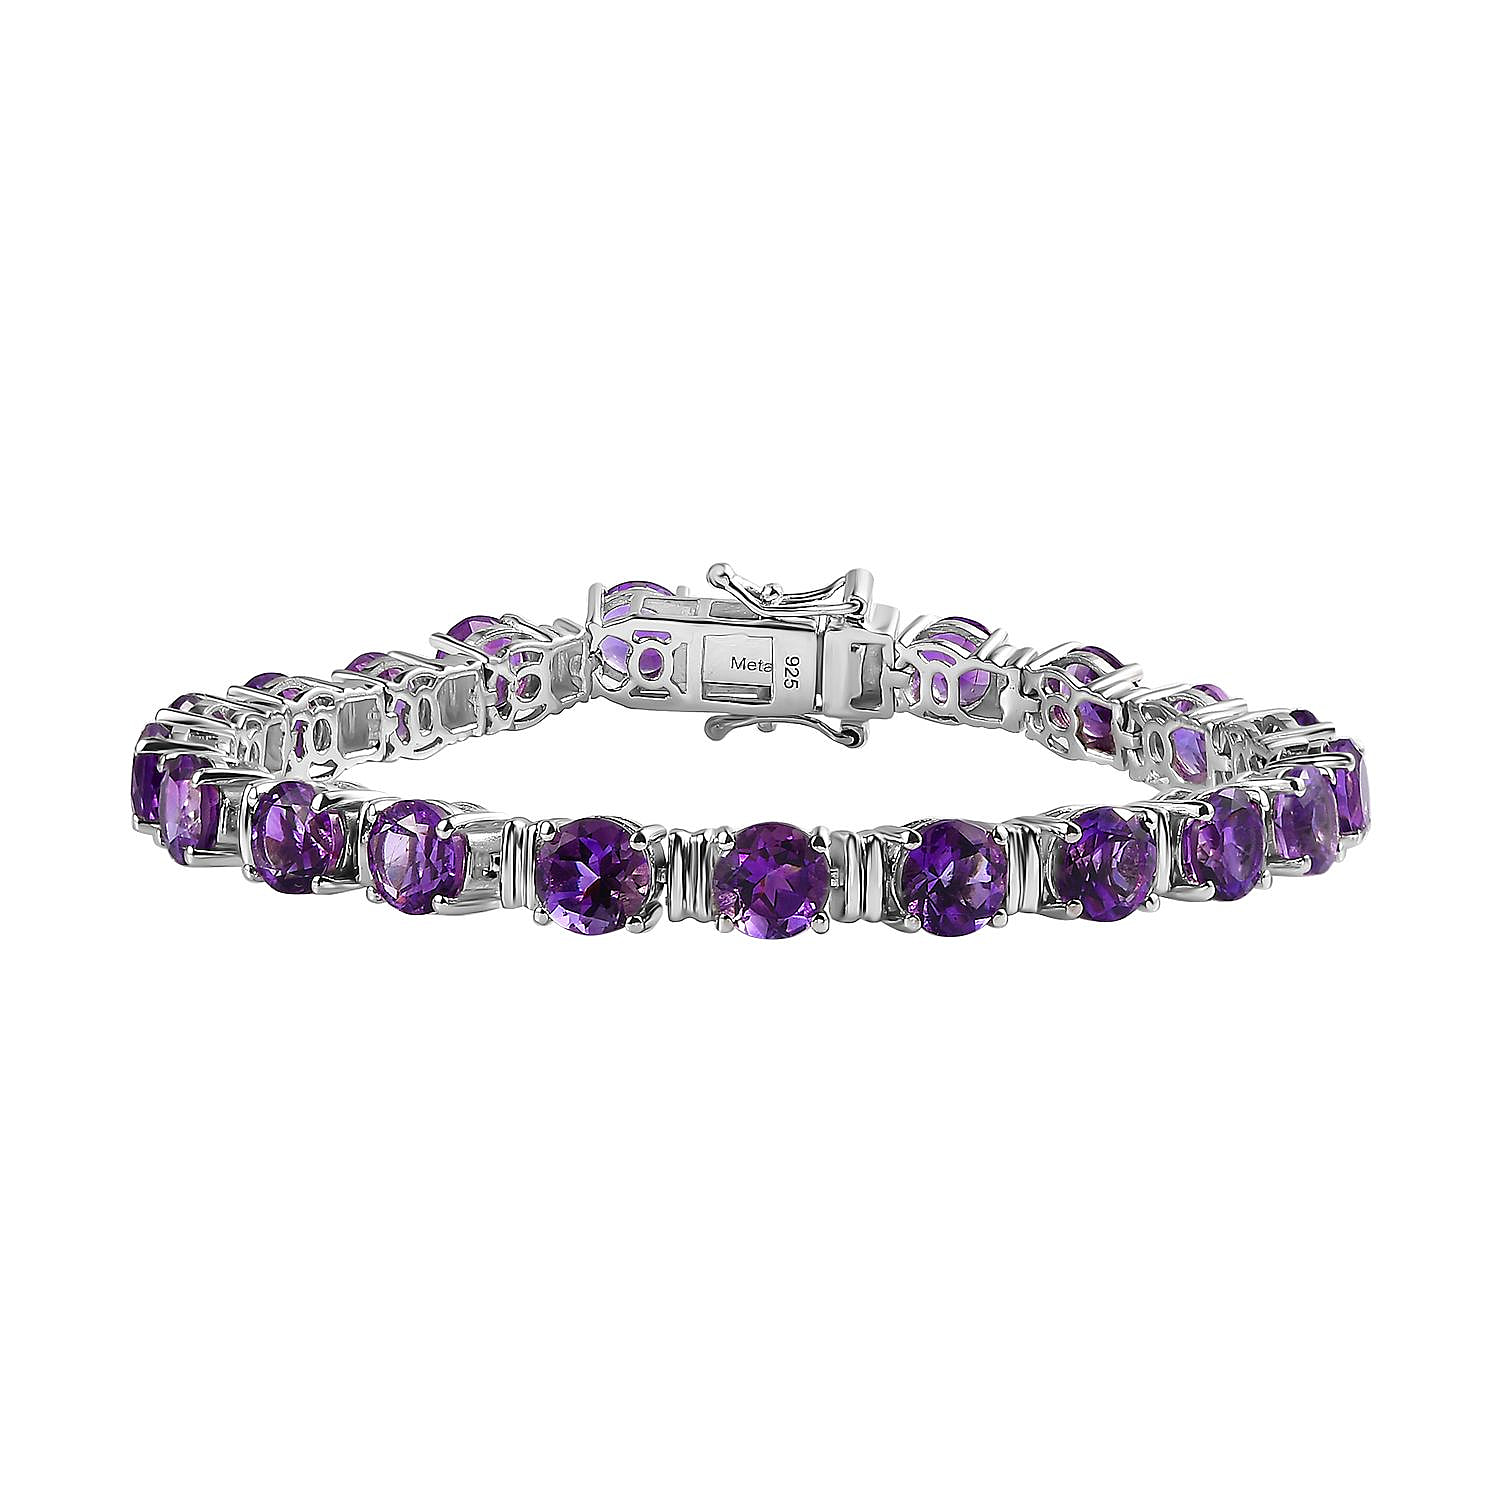 Moroccan Amethyst Tennis Bracelet (Size - 7) in Platinum Overlay Sterling Silver 17.40 Ct, Silver Wt 14.60 GM